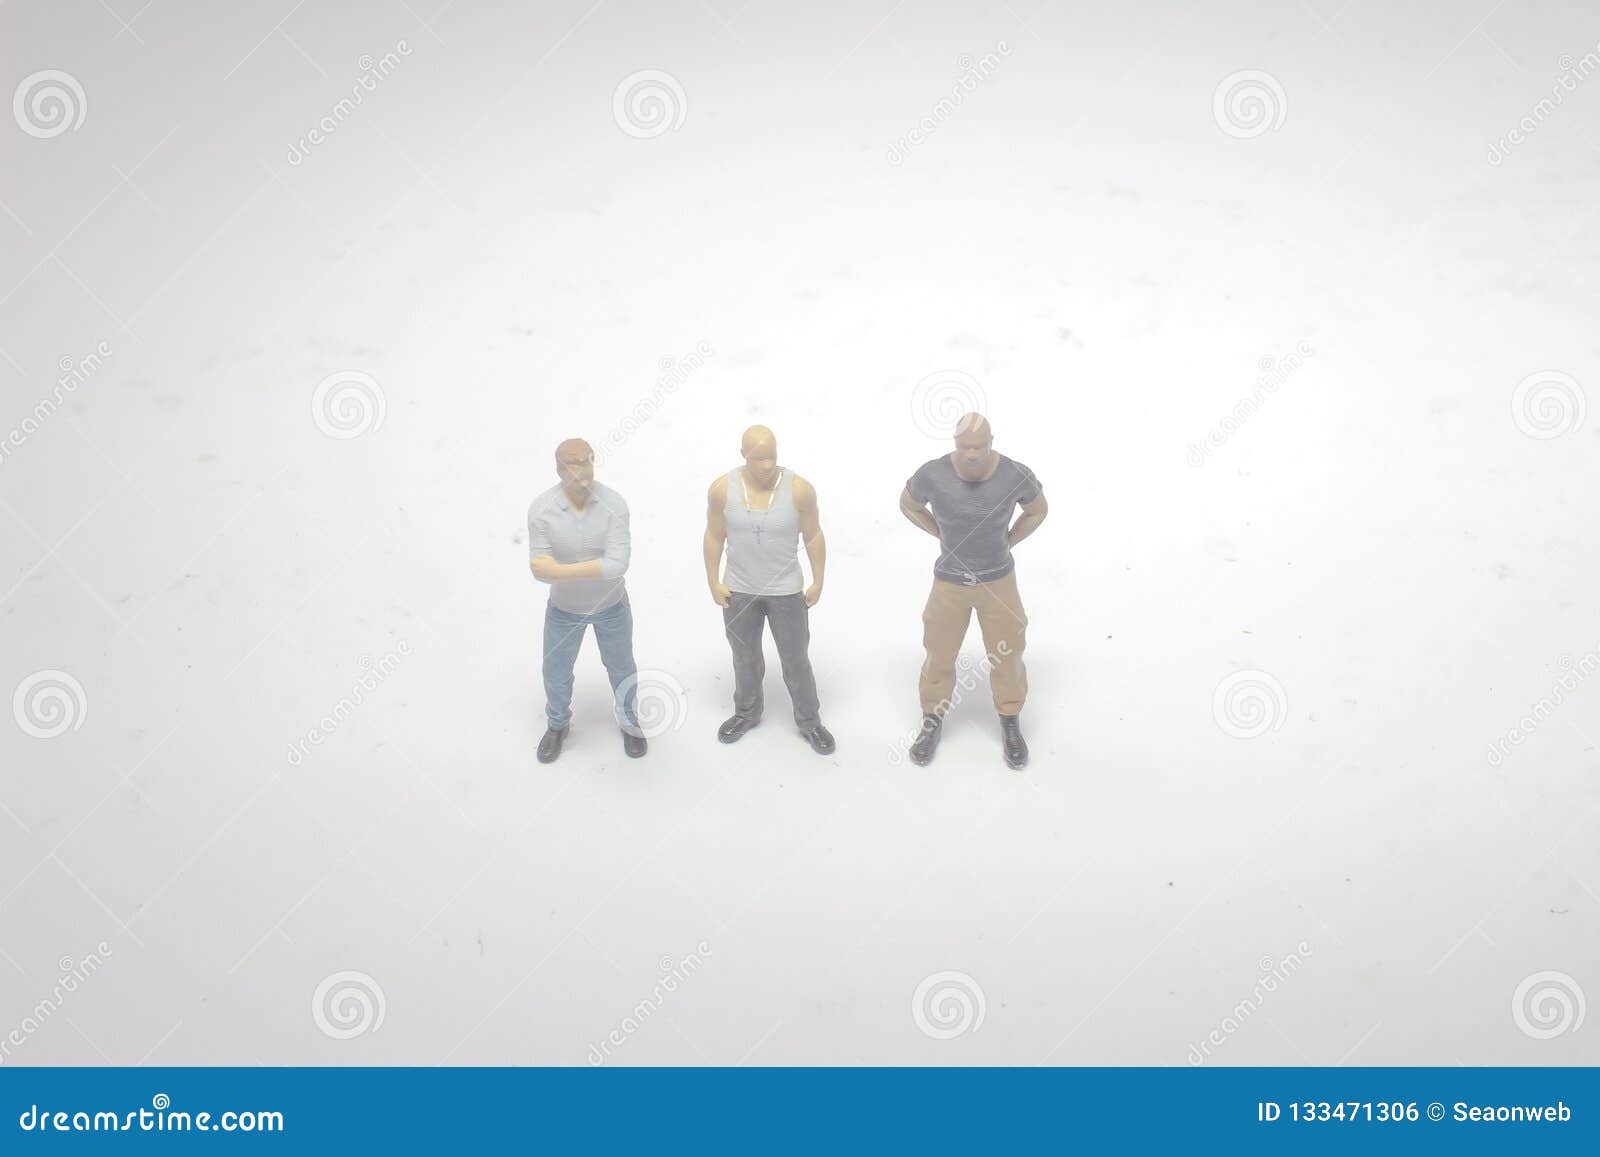 A Mini Figure Of Strong Men On Board Stock Photo Image Of Show Coach